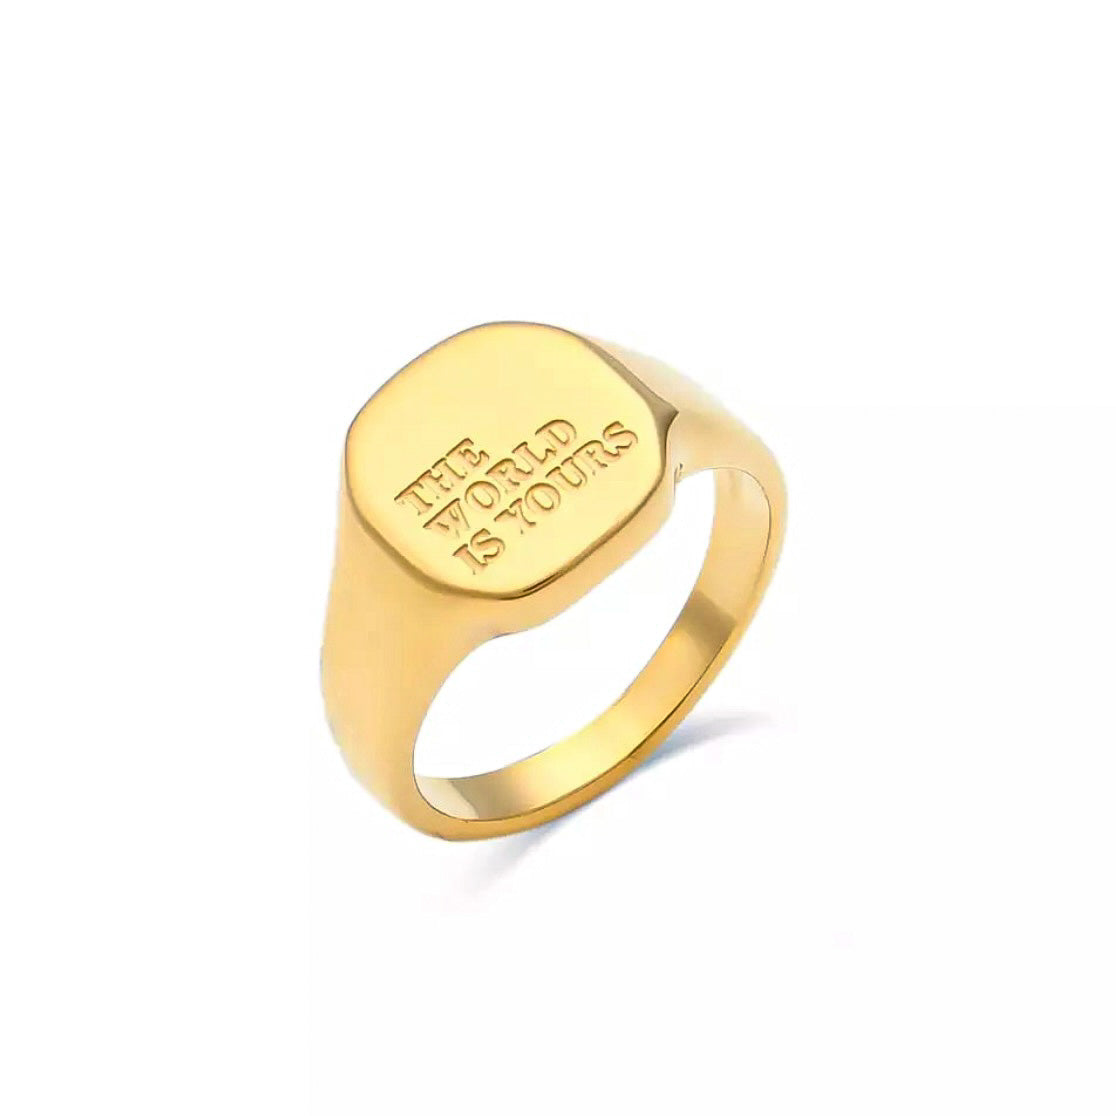 Oxford Ring│18k Gold Plated